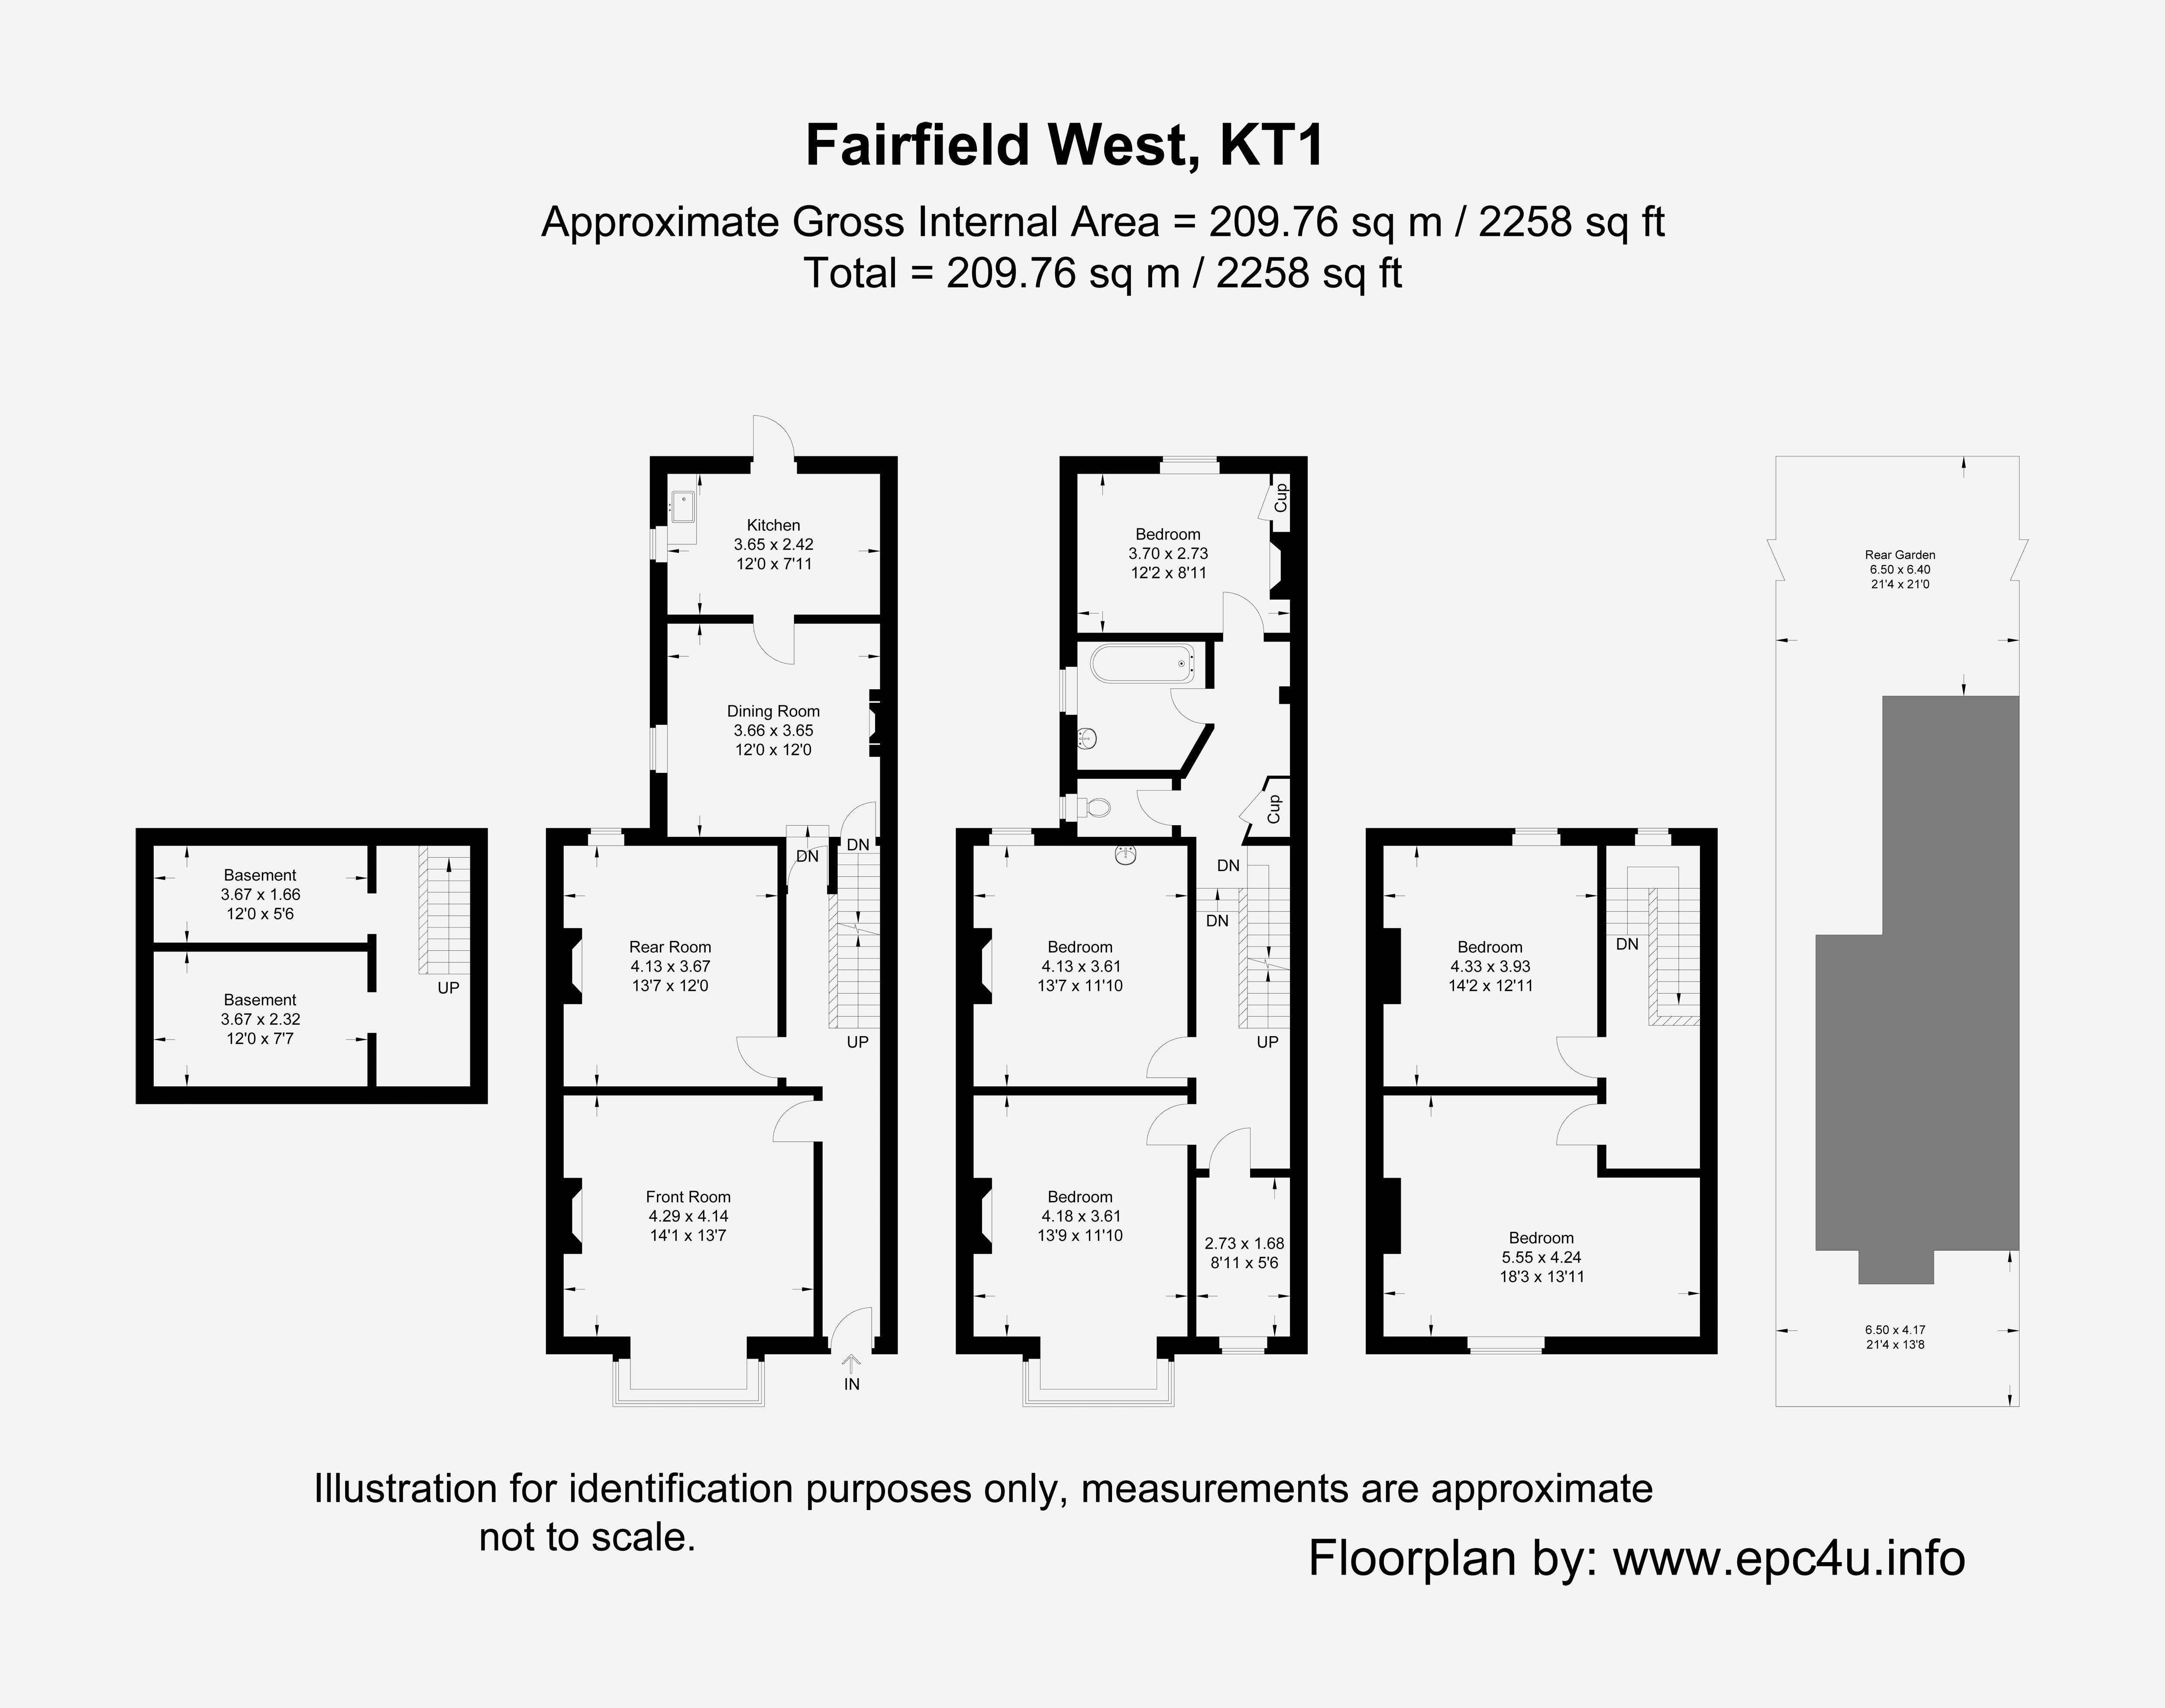 6 Bedrooms Semi-detached house for sale in Fairfield West, Kingston Upon Thames KT1